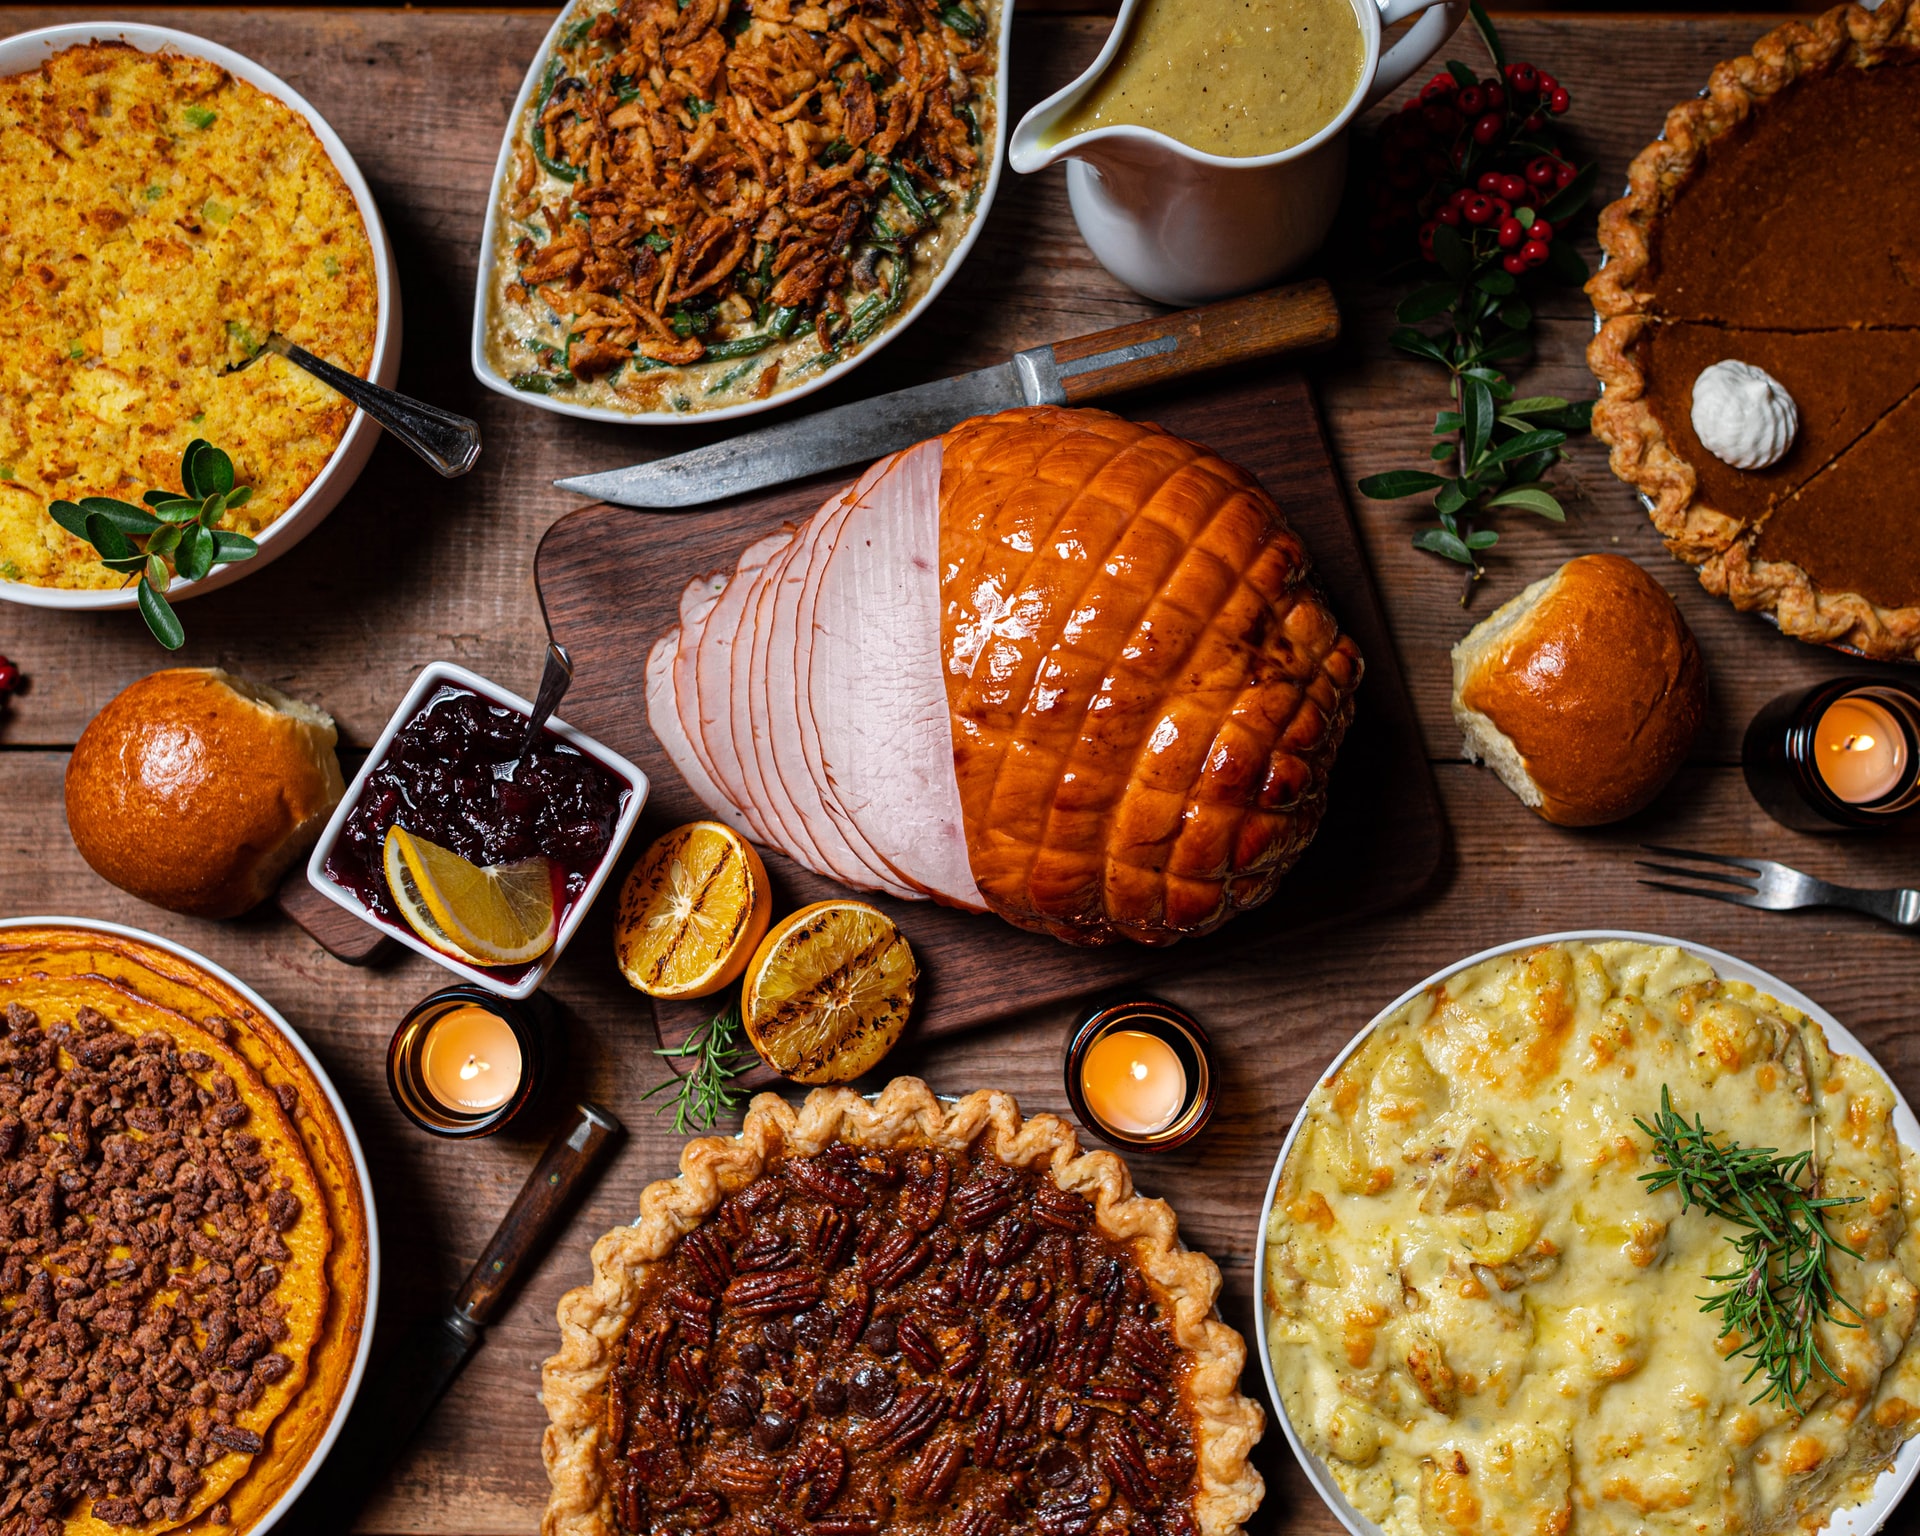 How to Host a Fun-Filled, Stress-Free Thanksgiving